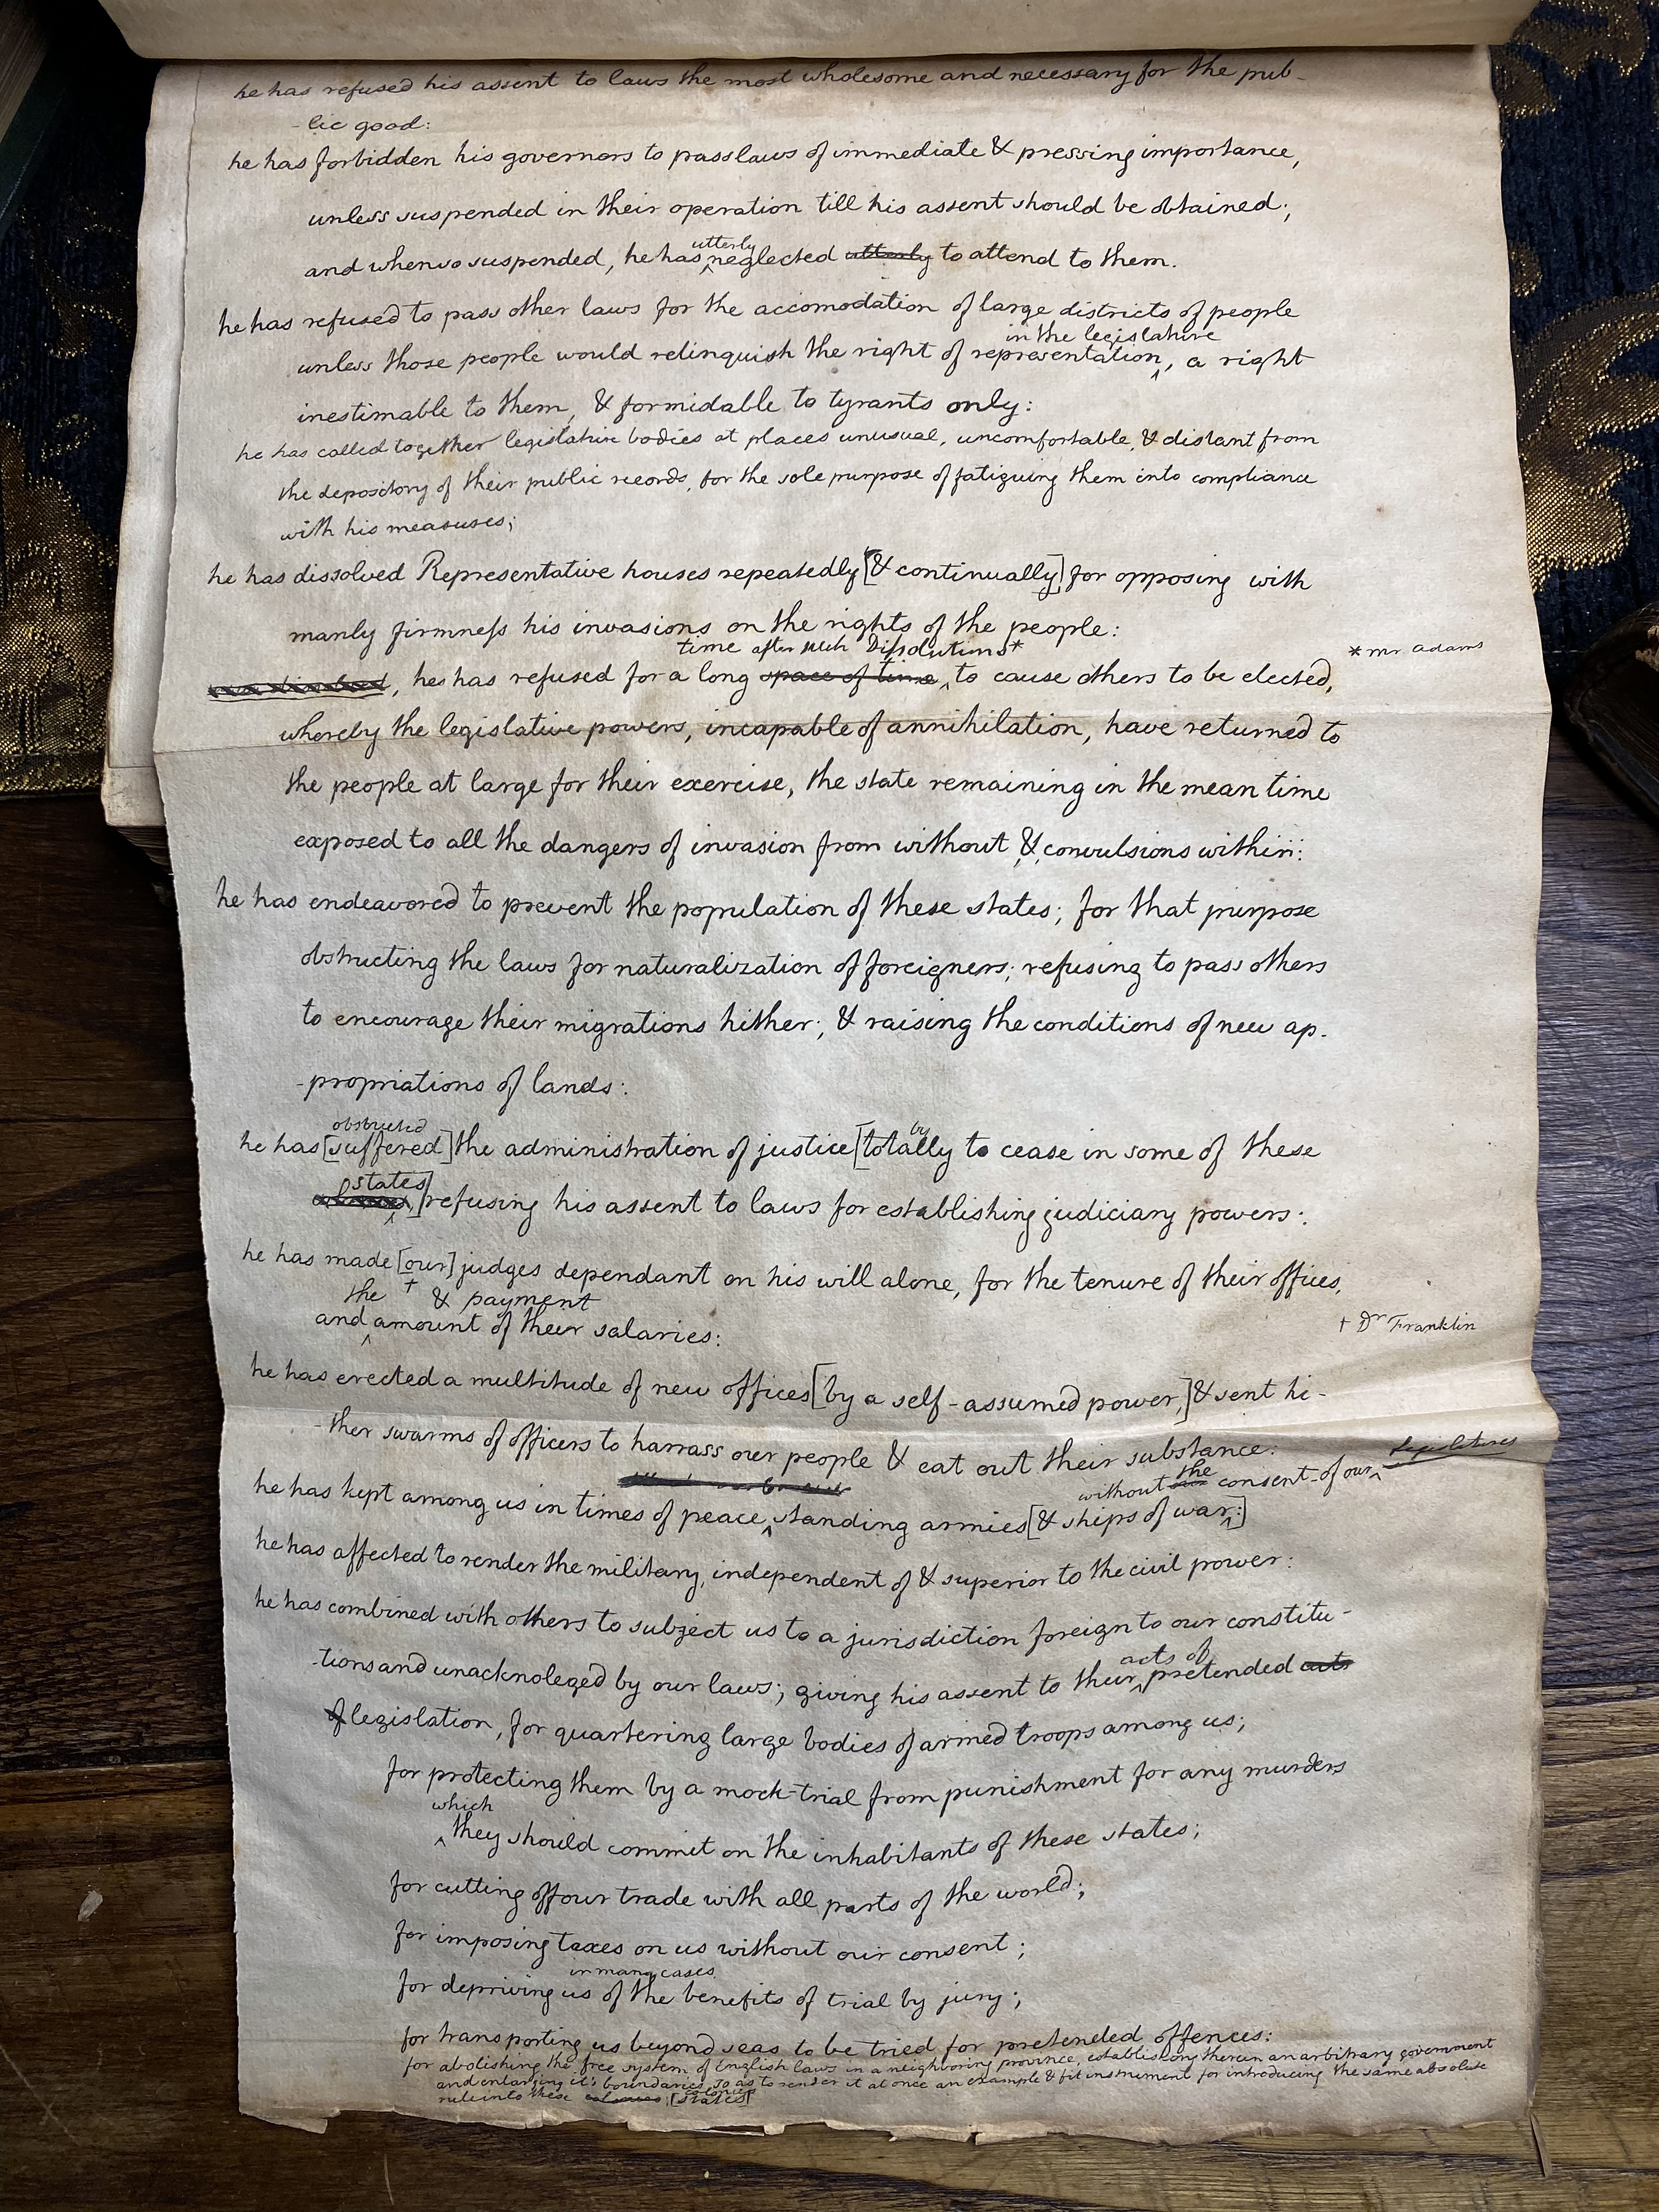 Page 2 of the original text of the Declaration of Independence with edits by Thomas Jefferson